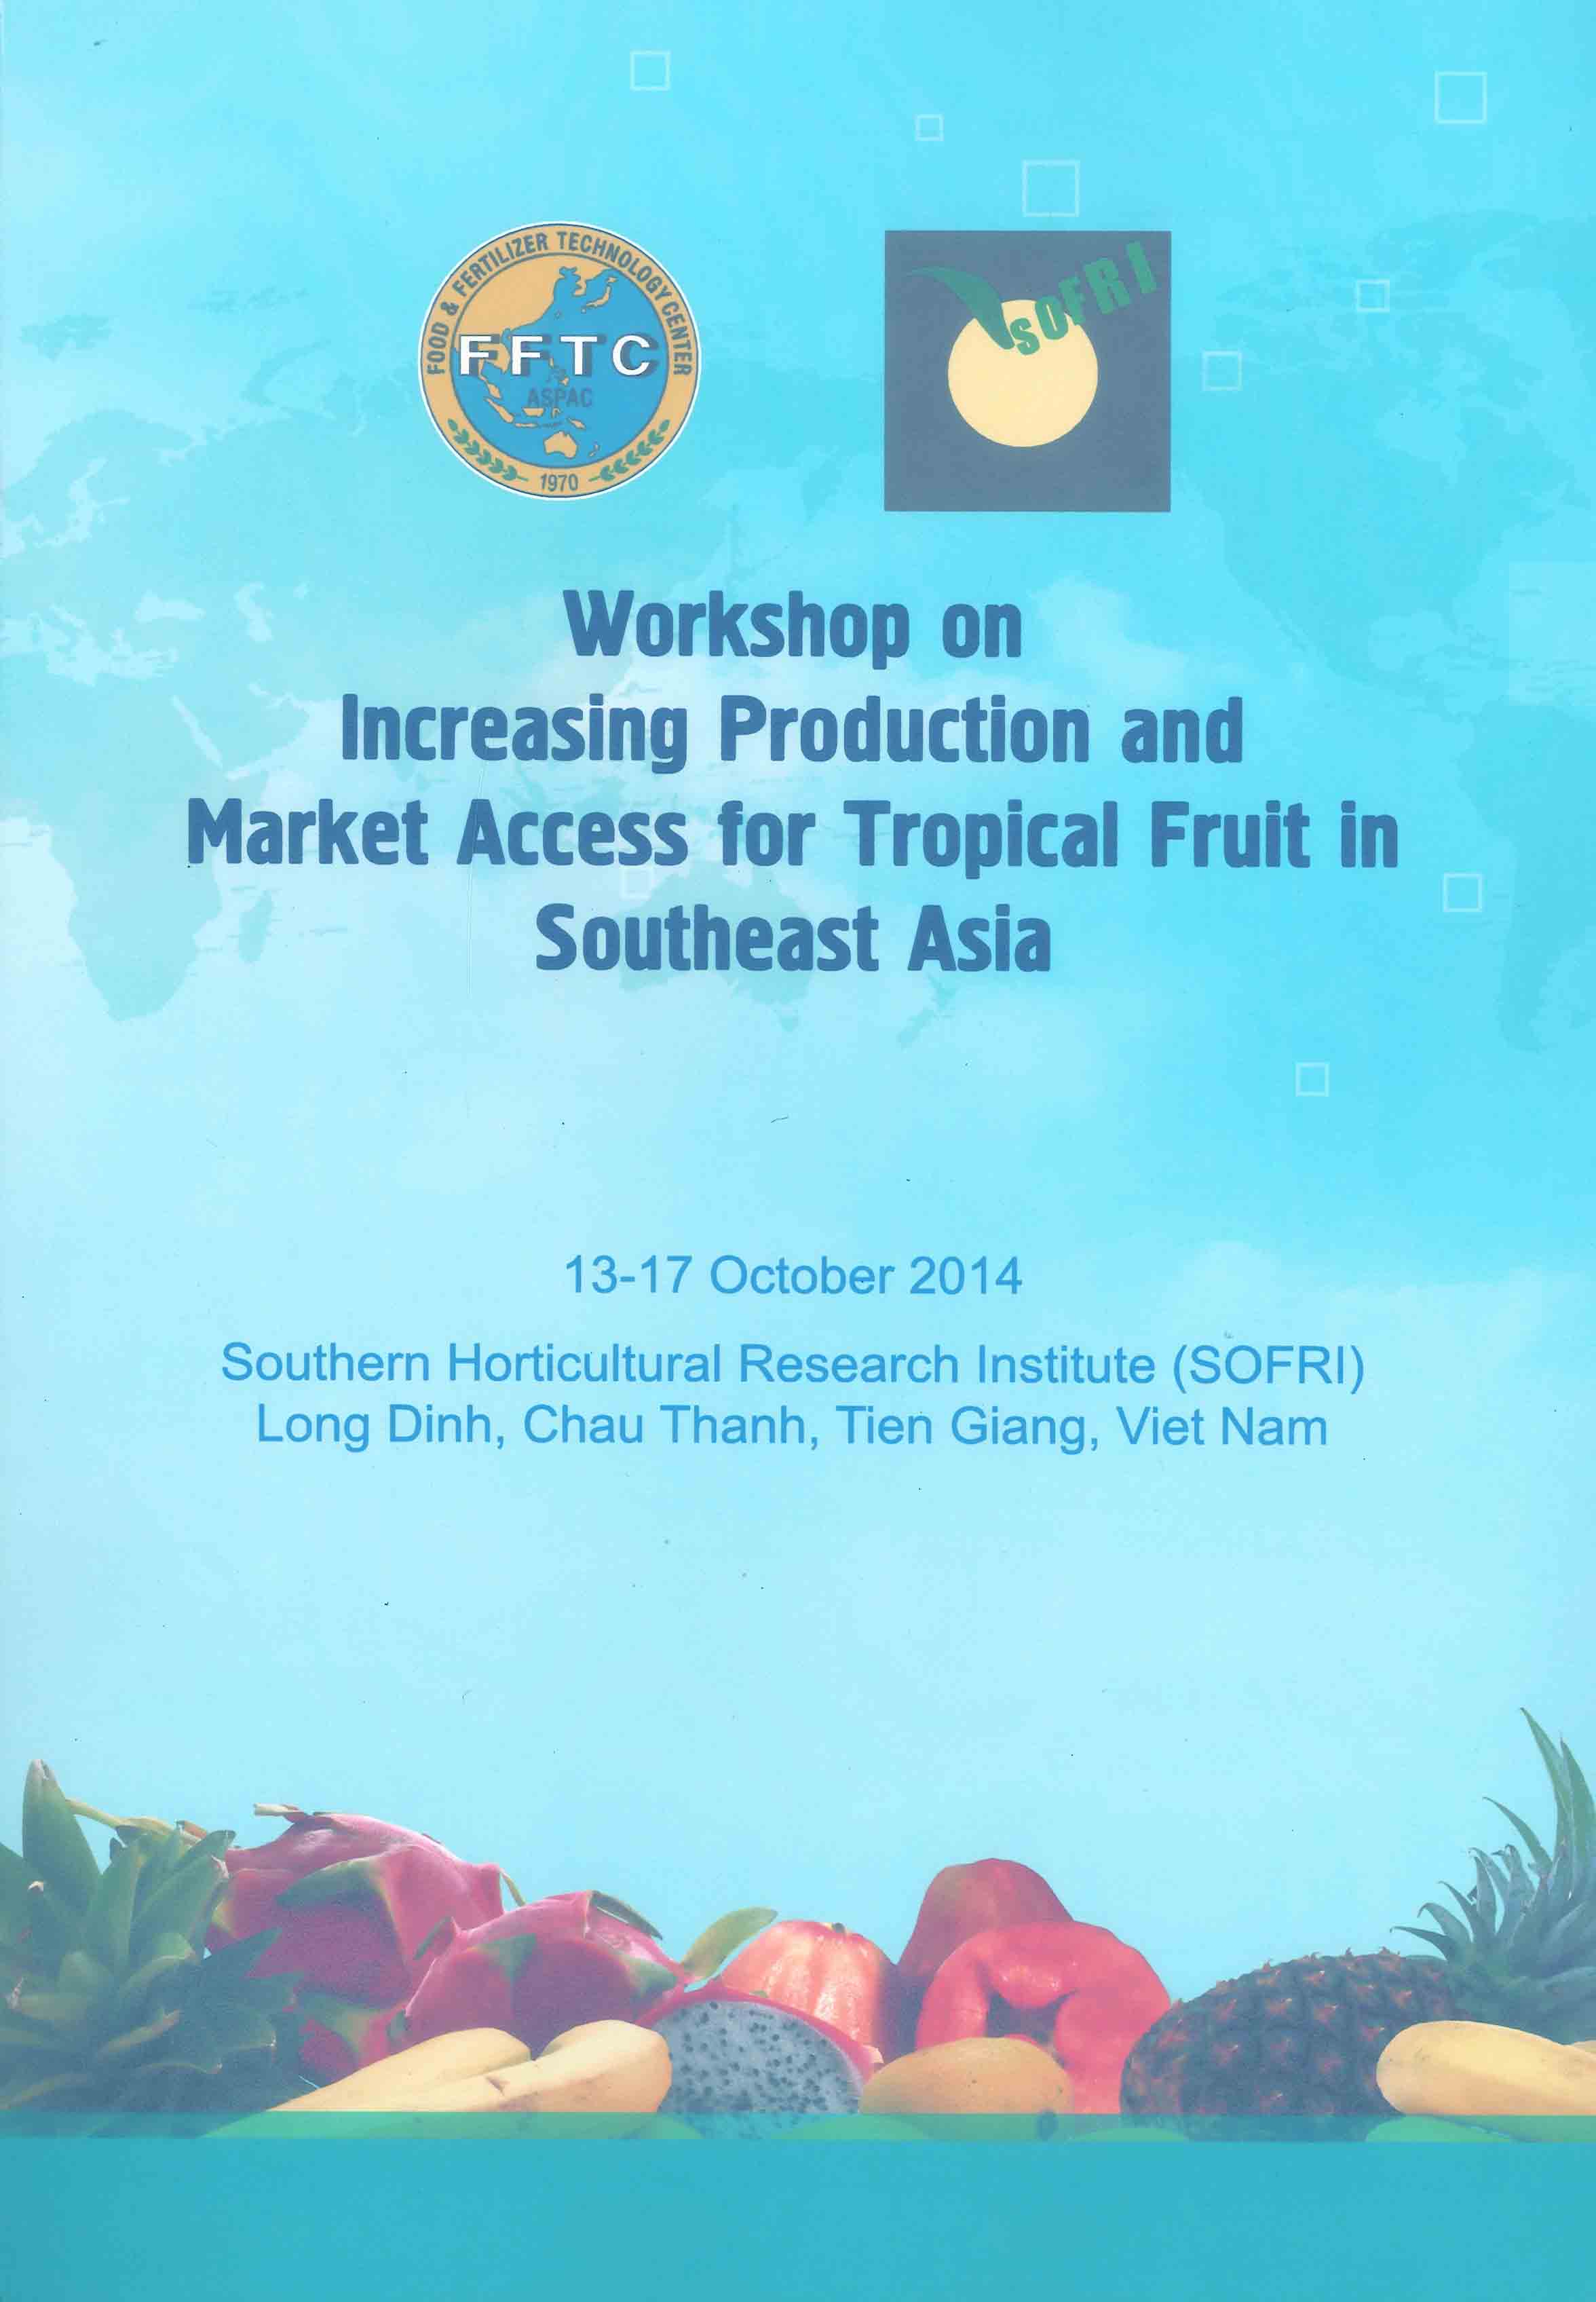 Workshop on increasing Production and Market Access for Tropical Fruit in Southeast Asia